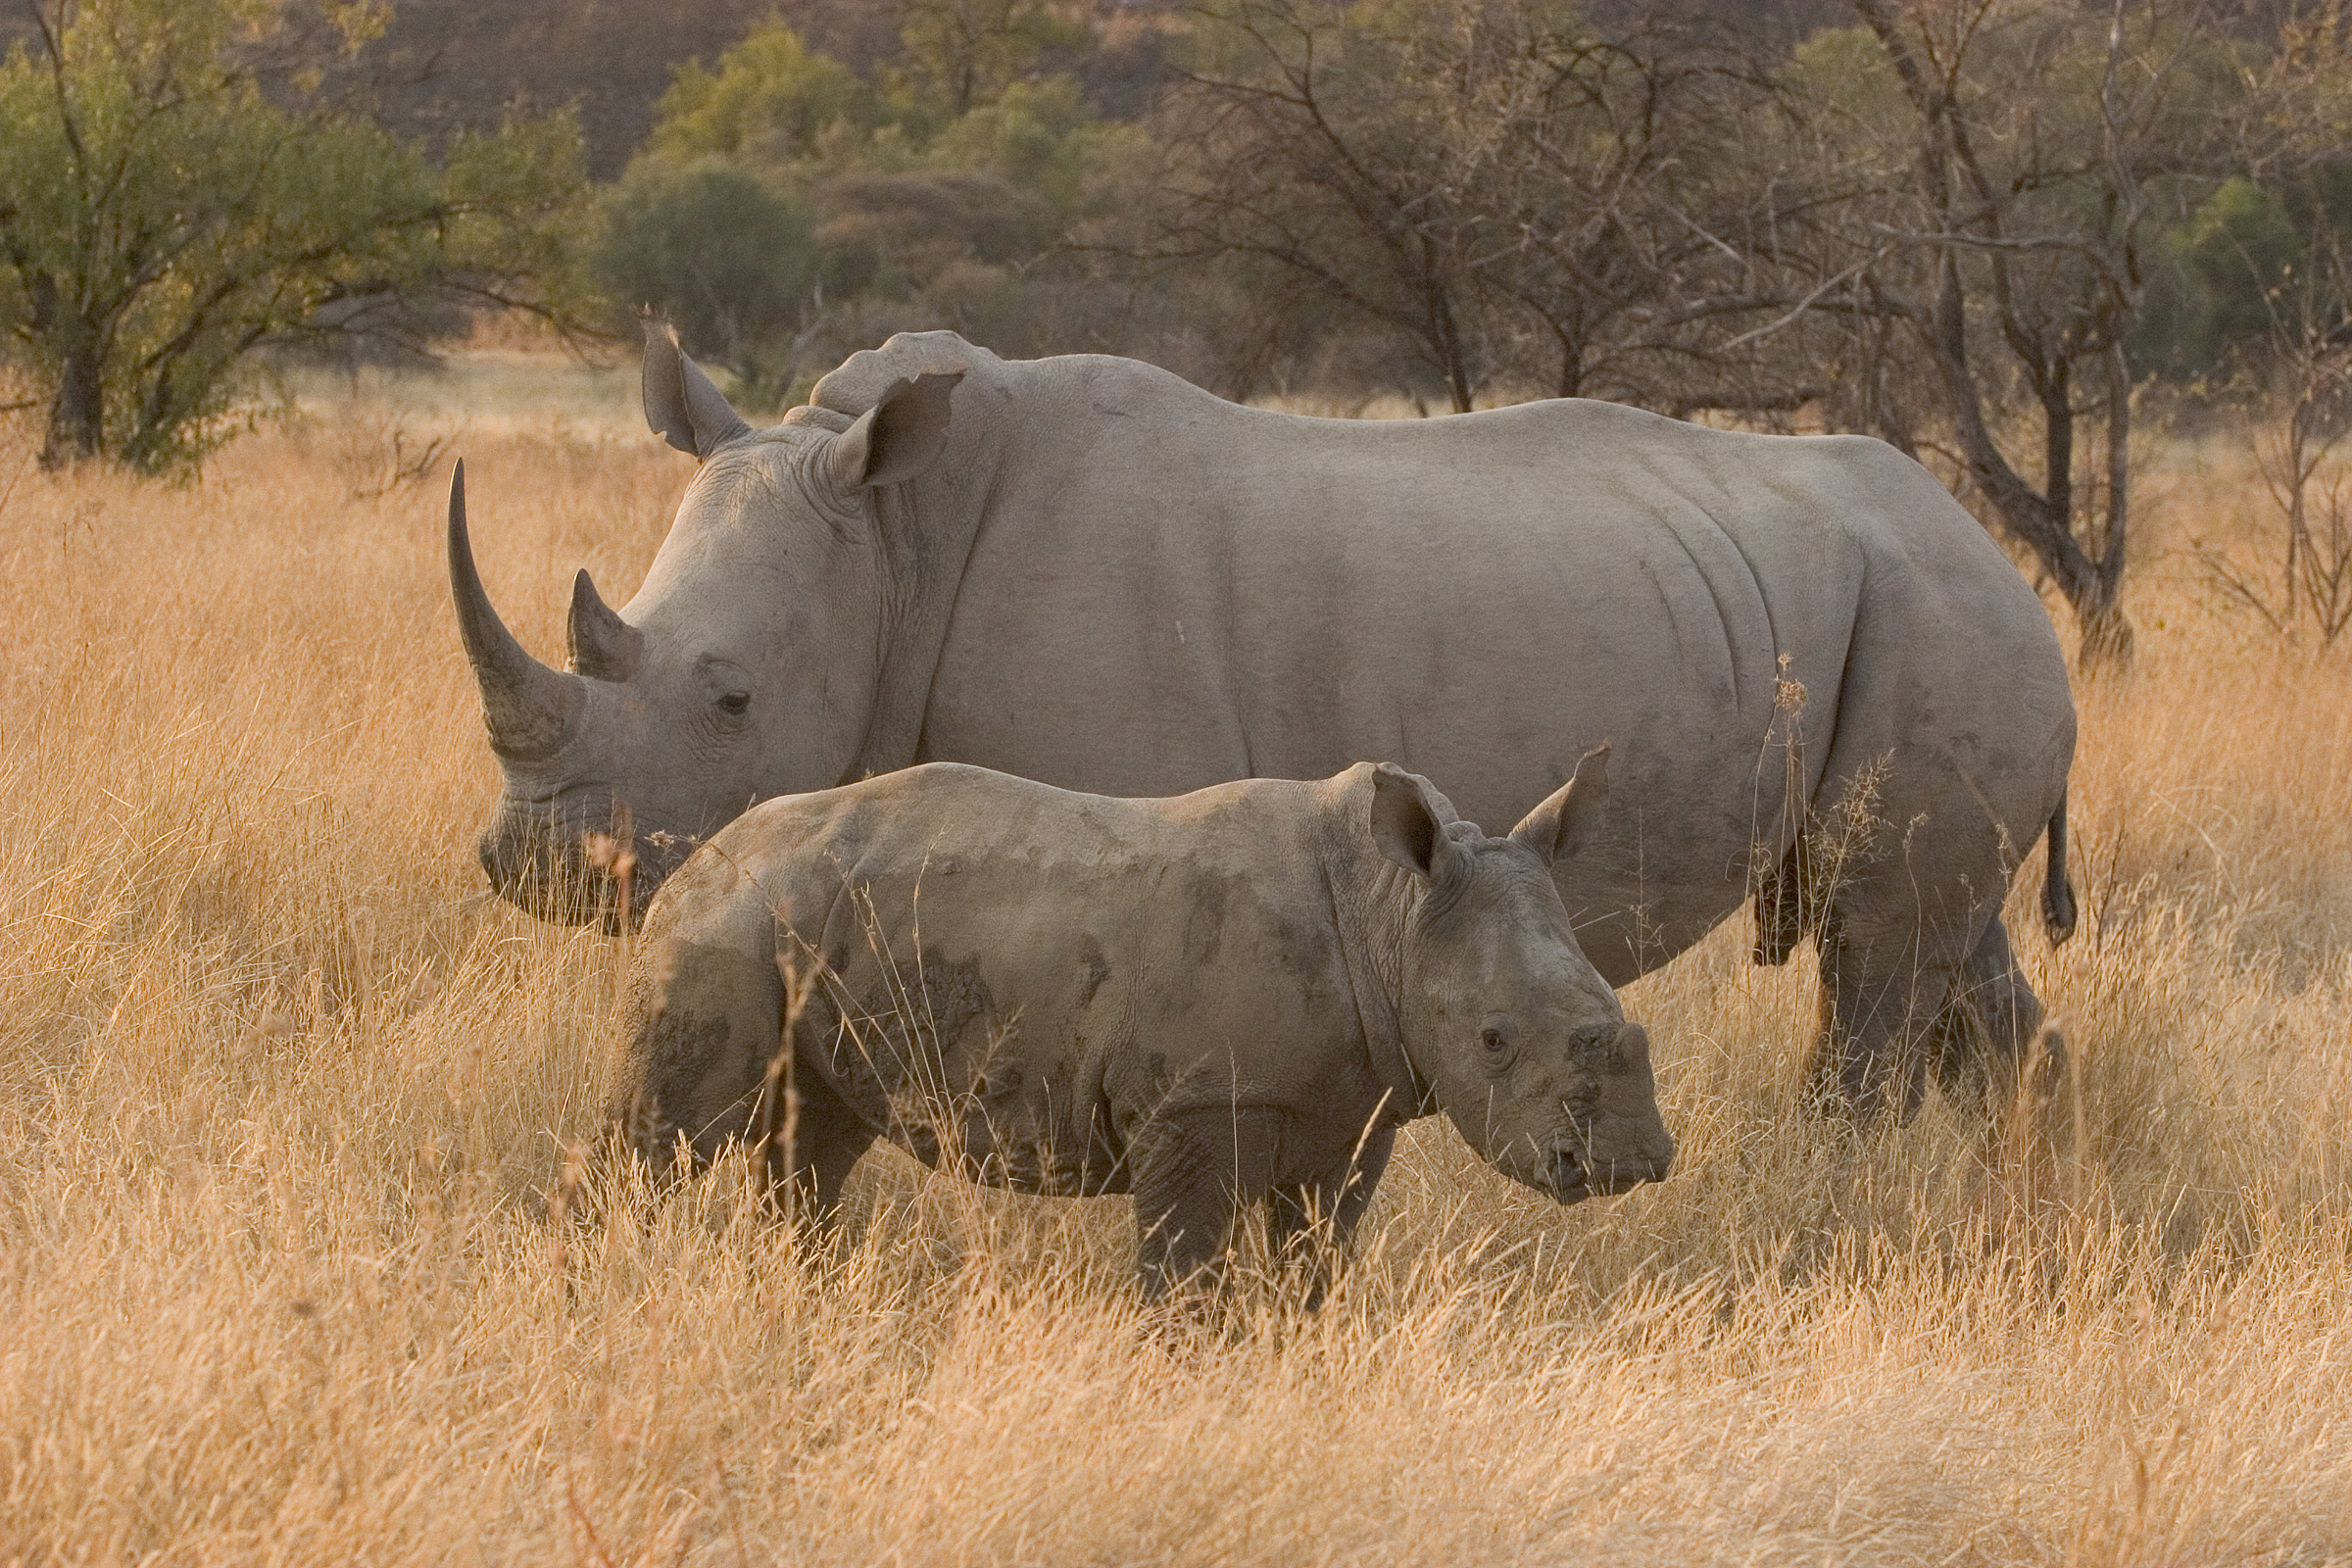 A mother rhino and calf